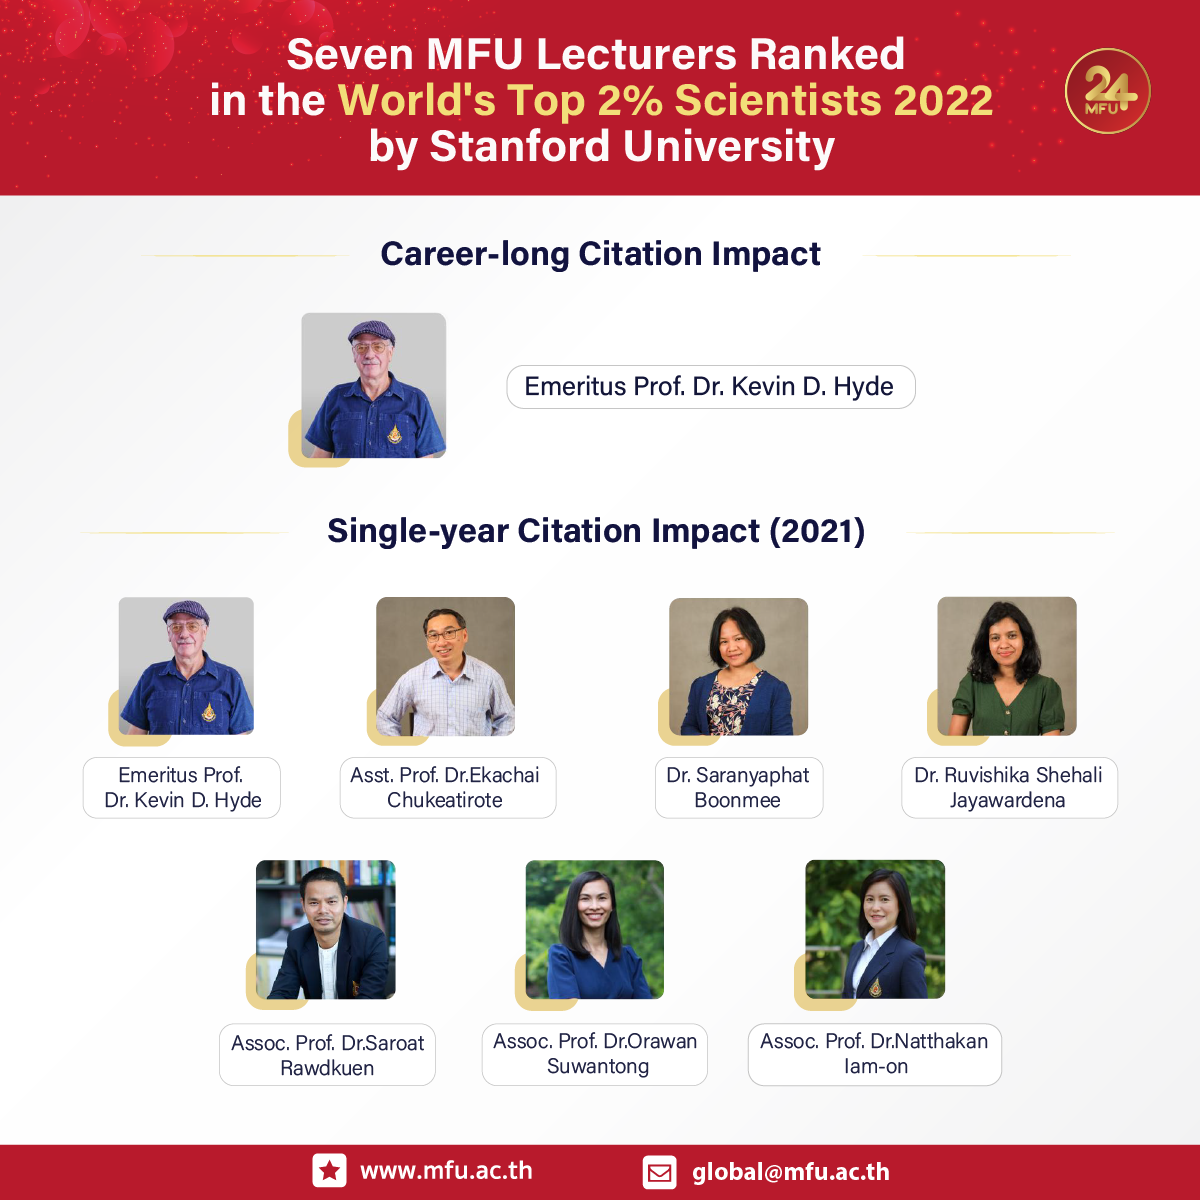 MFU Lecturers Ranked in the World's Top 2% Scientists 2022 by Stanford University